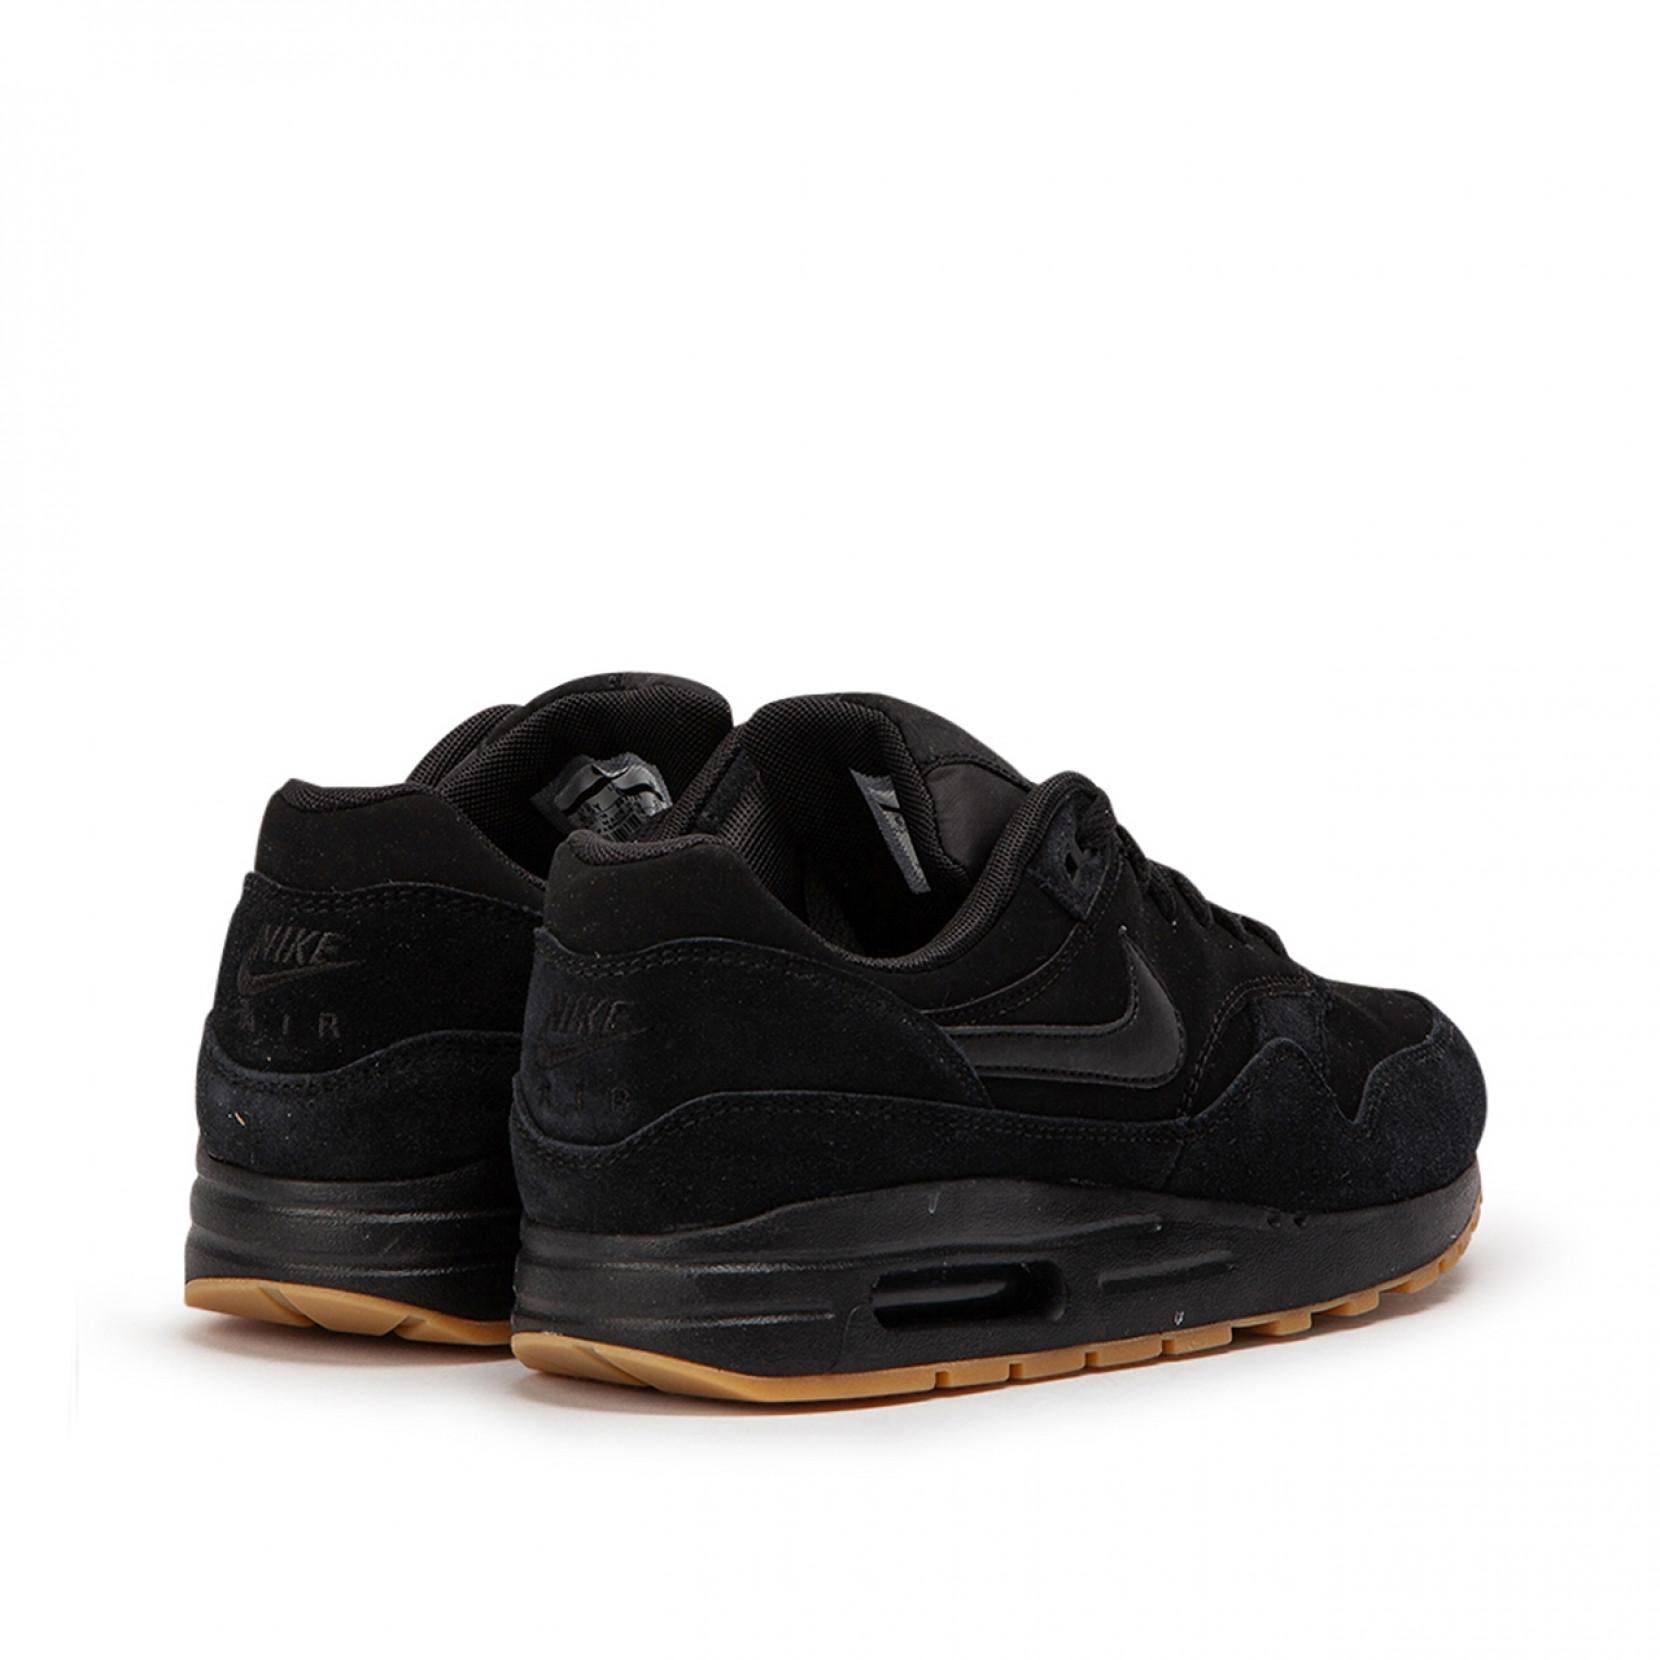 Nike Leather Nike Air Max 1 Gs in Black 